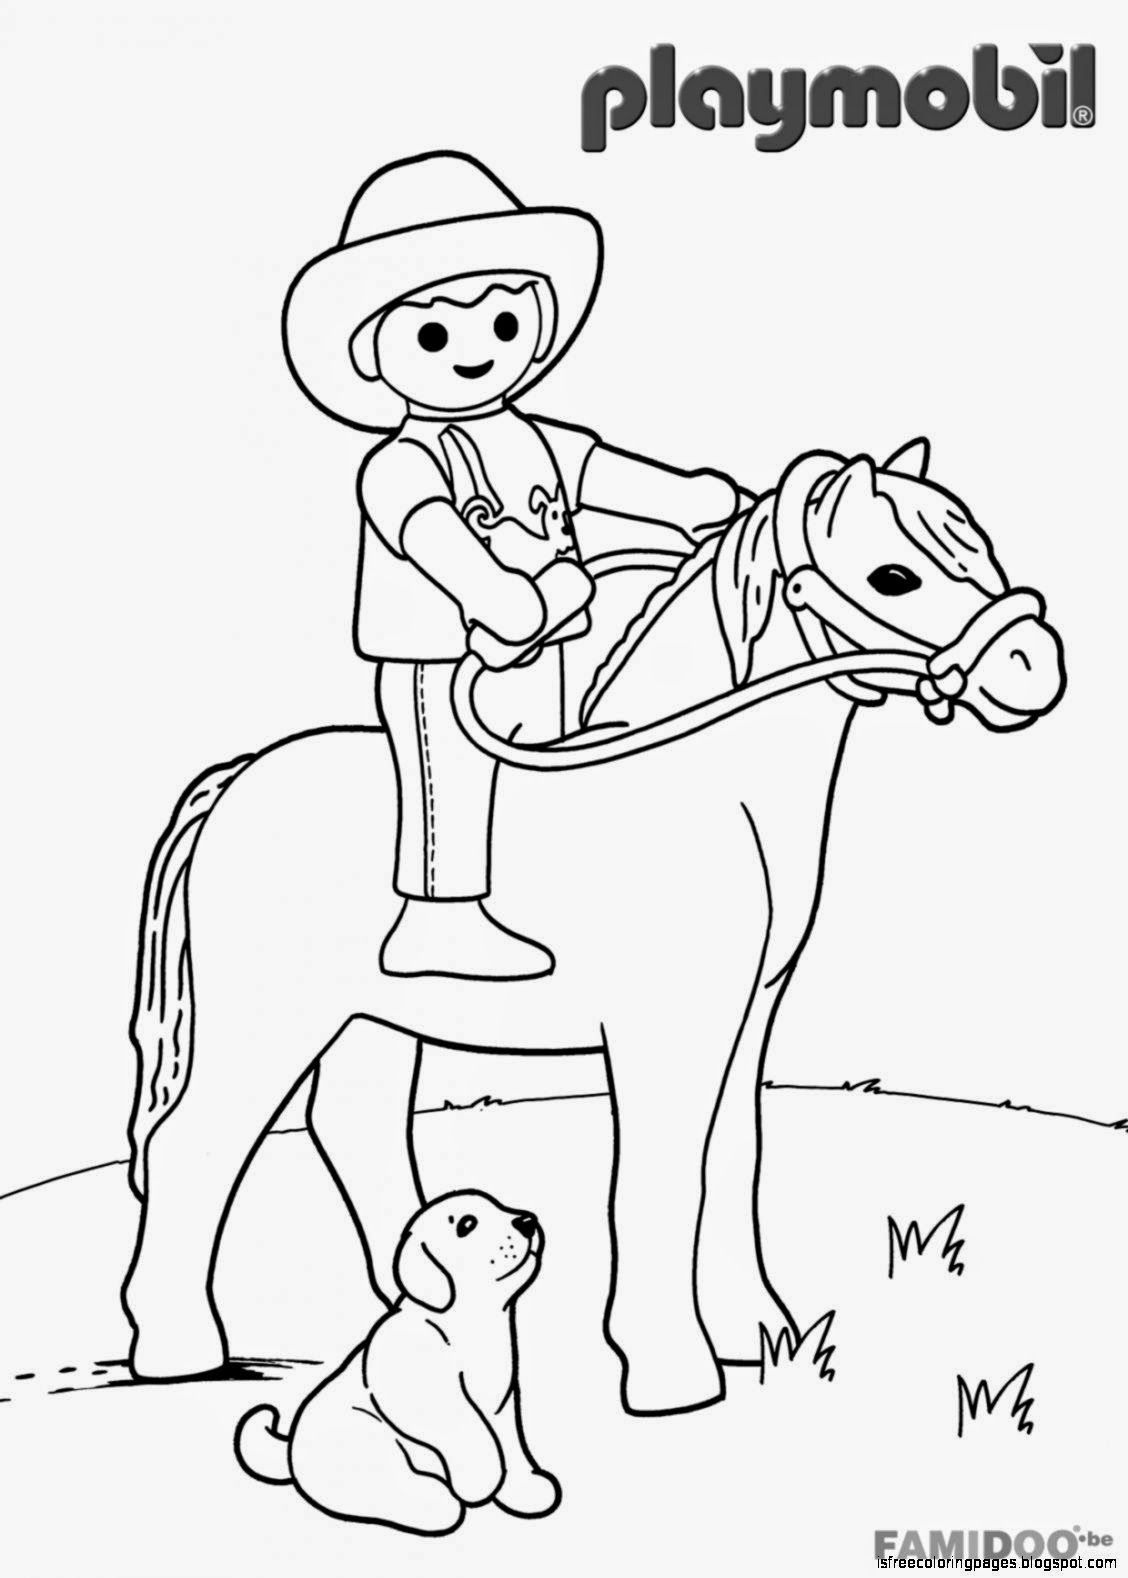 Playmobil Coloring Pages | Free Coloring Pages